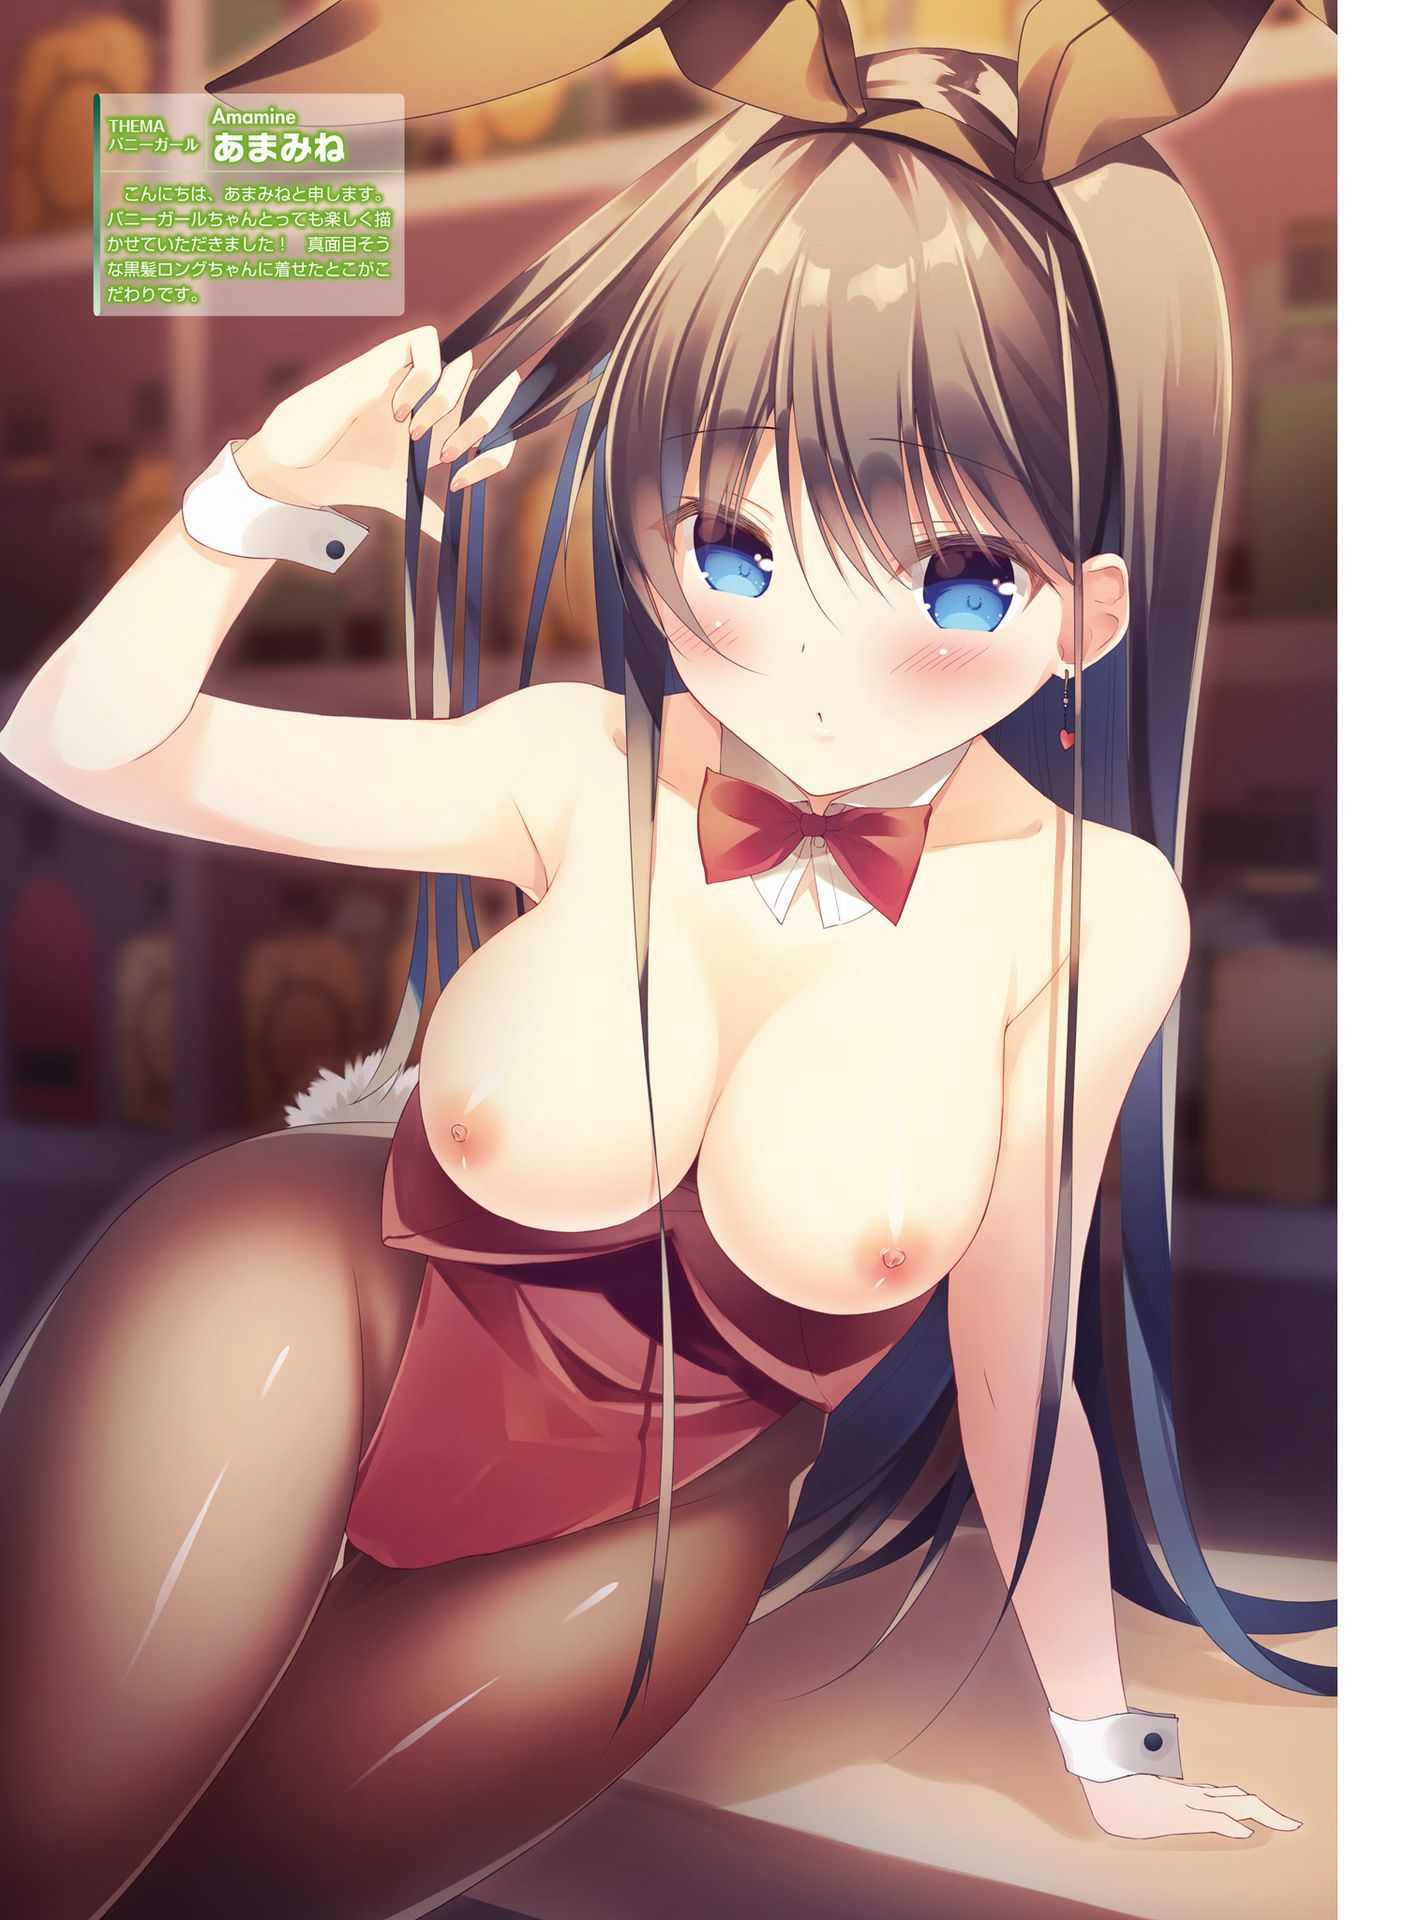 Bunny Girl's exit erotic pictures! 6